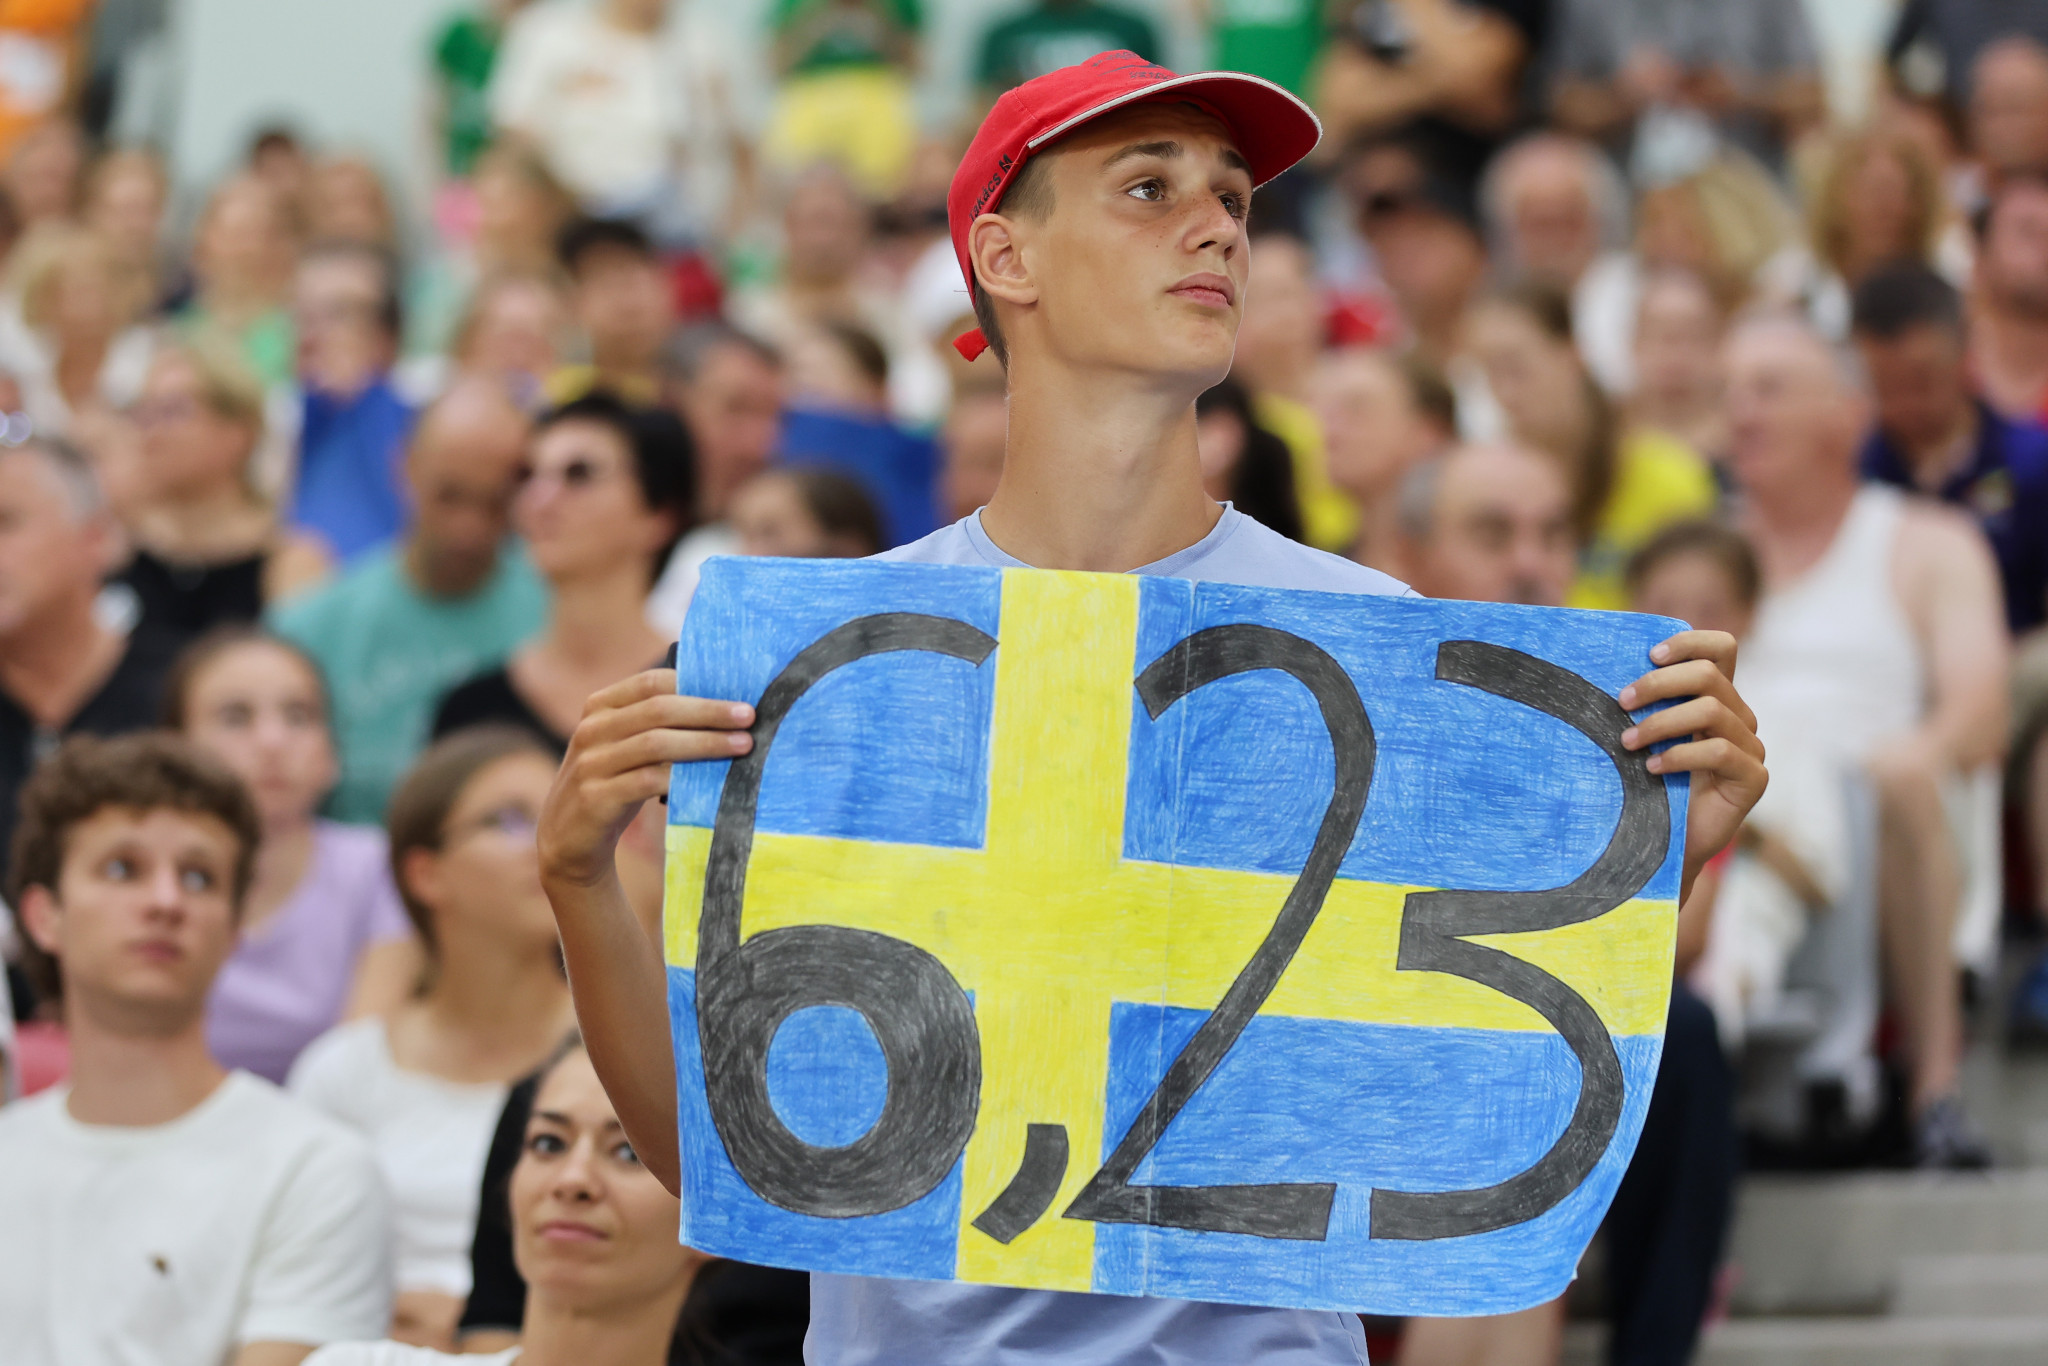 Armand Duplantis of Sweden had three attempts at setting the first world record in Budapest with a 6.23m jump in the pole vault, but narrowly failed on the last two ©Getty Images